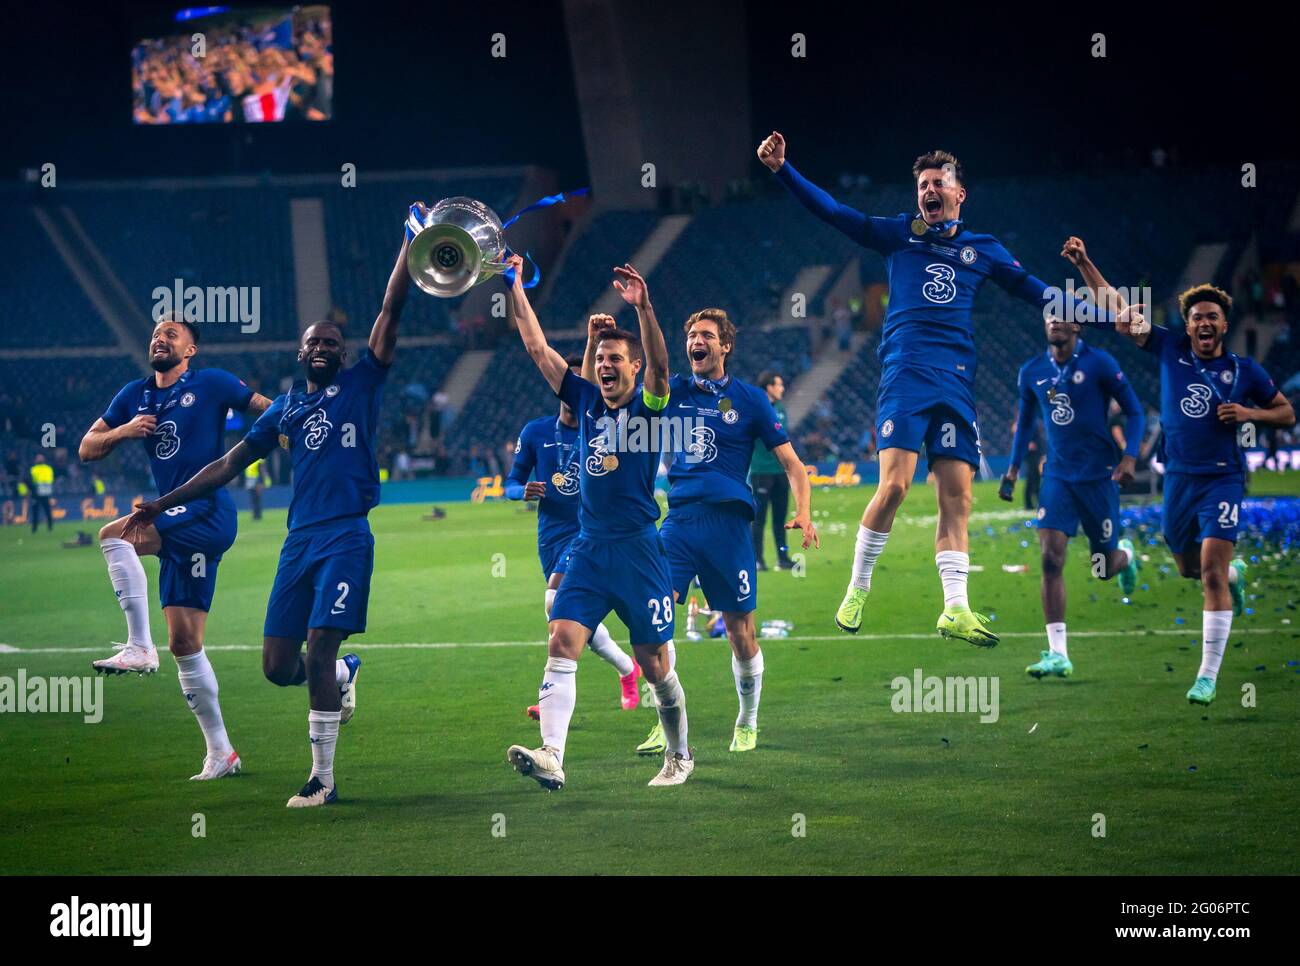 Ryal Quay, UK. 29th May, 2021. Csar Azpilicueta (28) & Antonio RŸdiger (2) lead the celebrations with the winning trophy during the UEFA Champions League Final match between Manchester City and Chelsea at The Est‡dio do Drag‹o, Porto, Portugal on 29 May 2021. Photo by Andy Rowland. Credit: PRiME Media Images/Alamy Live News Stock Photo